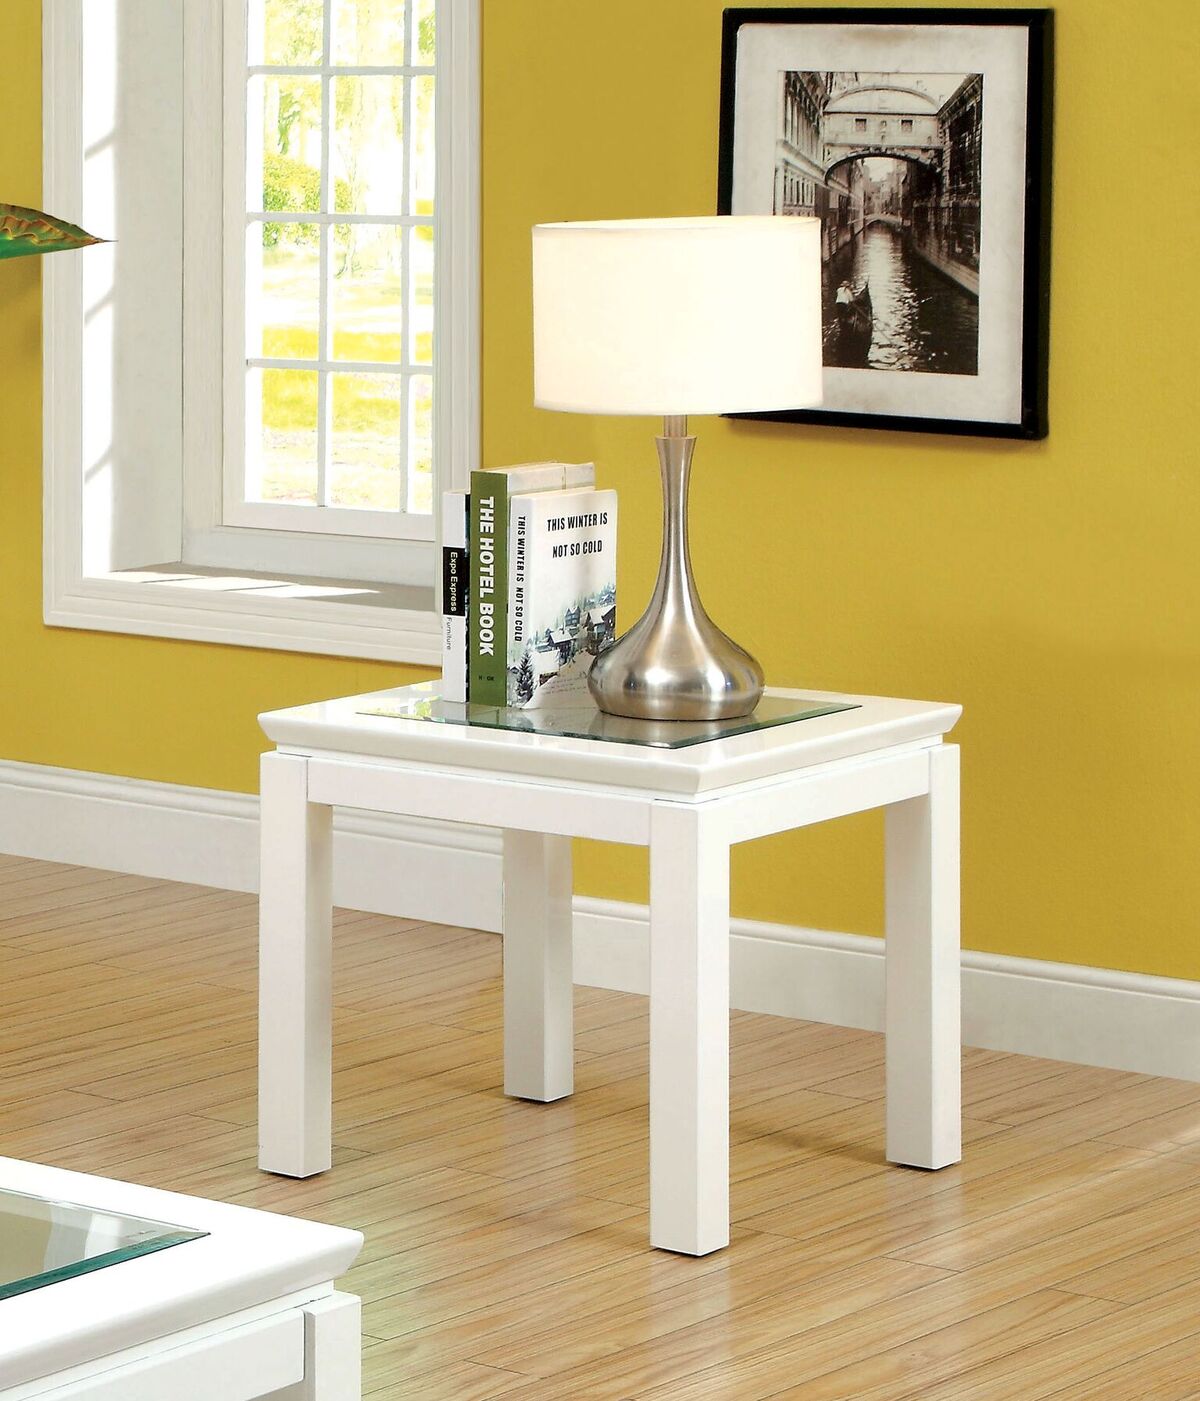 Furniture Of America Oles Modern High Gloss End Table In White - Enitial Lab Idf-4238wh-e